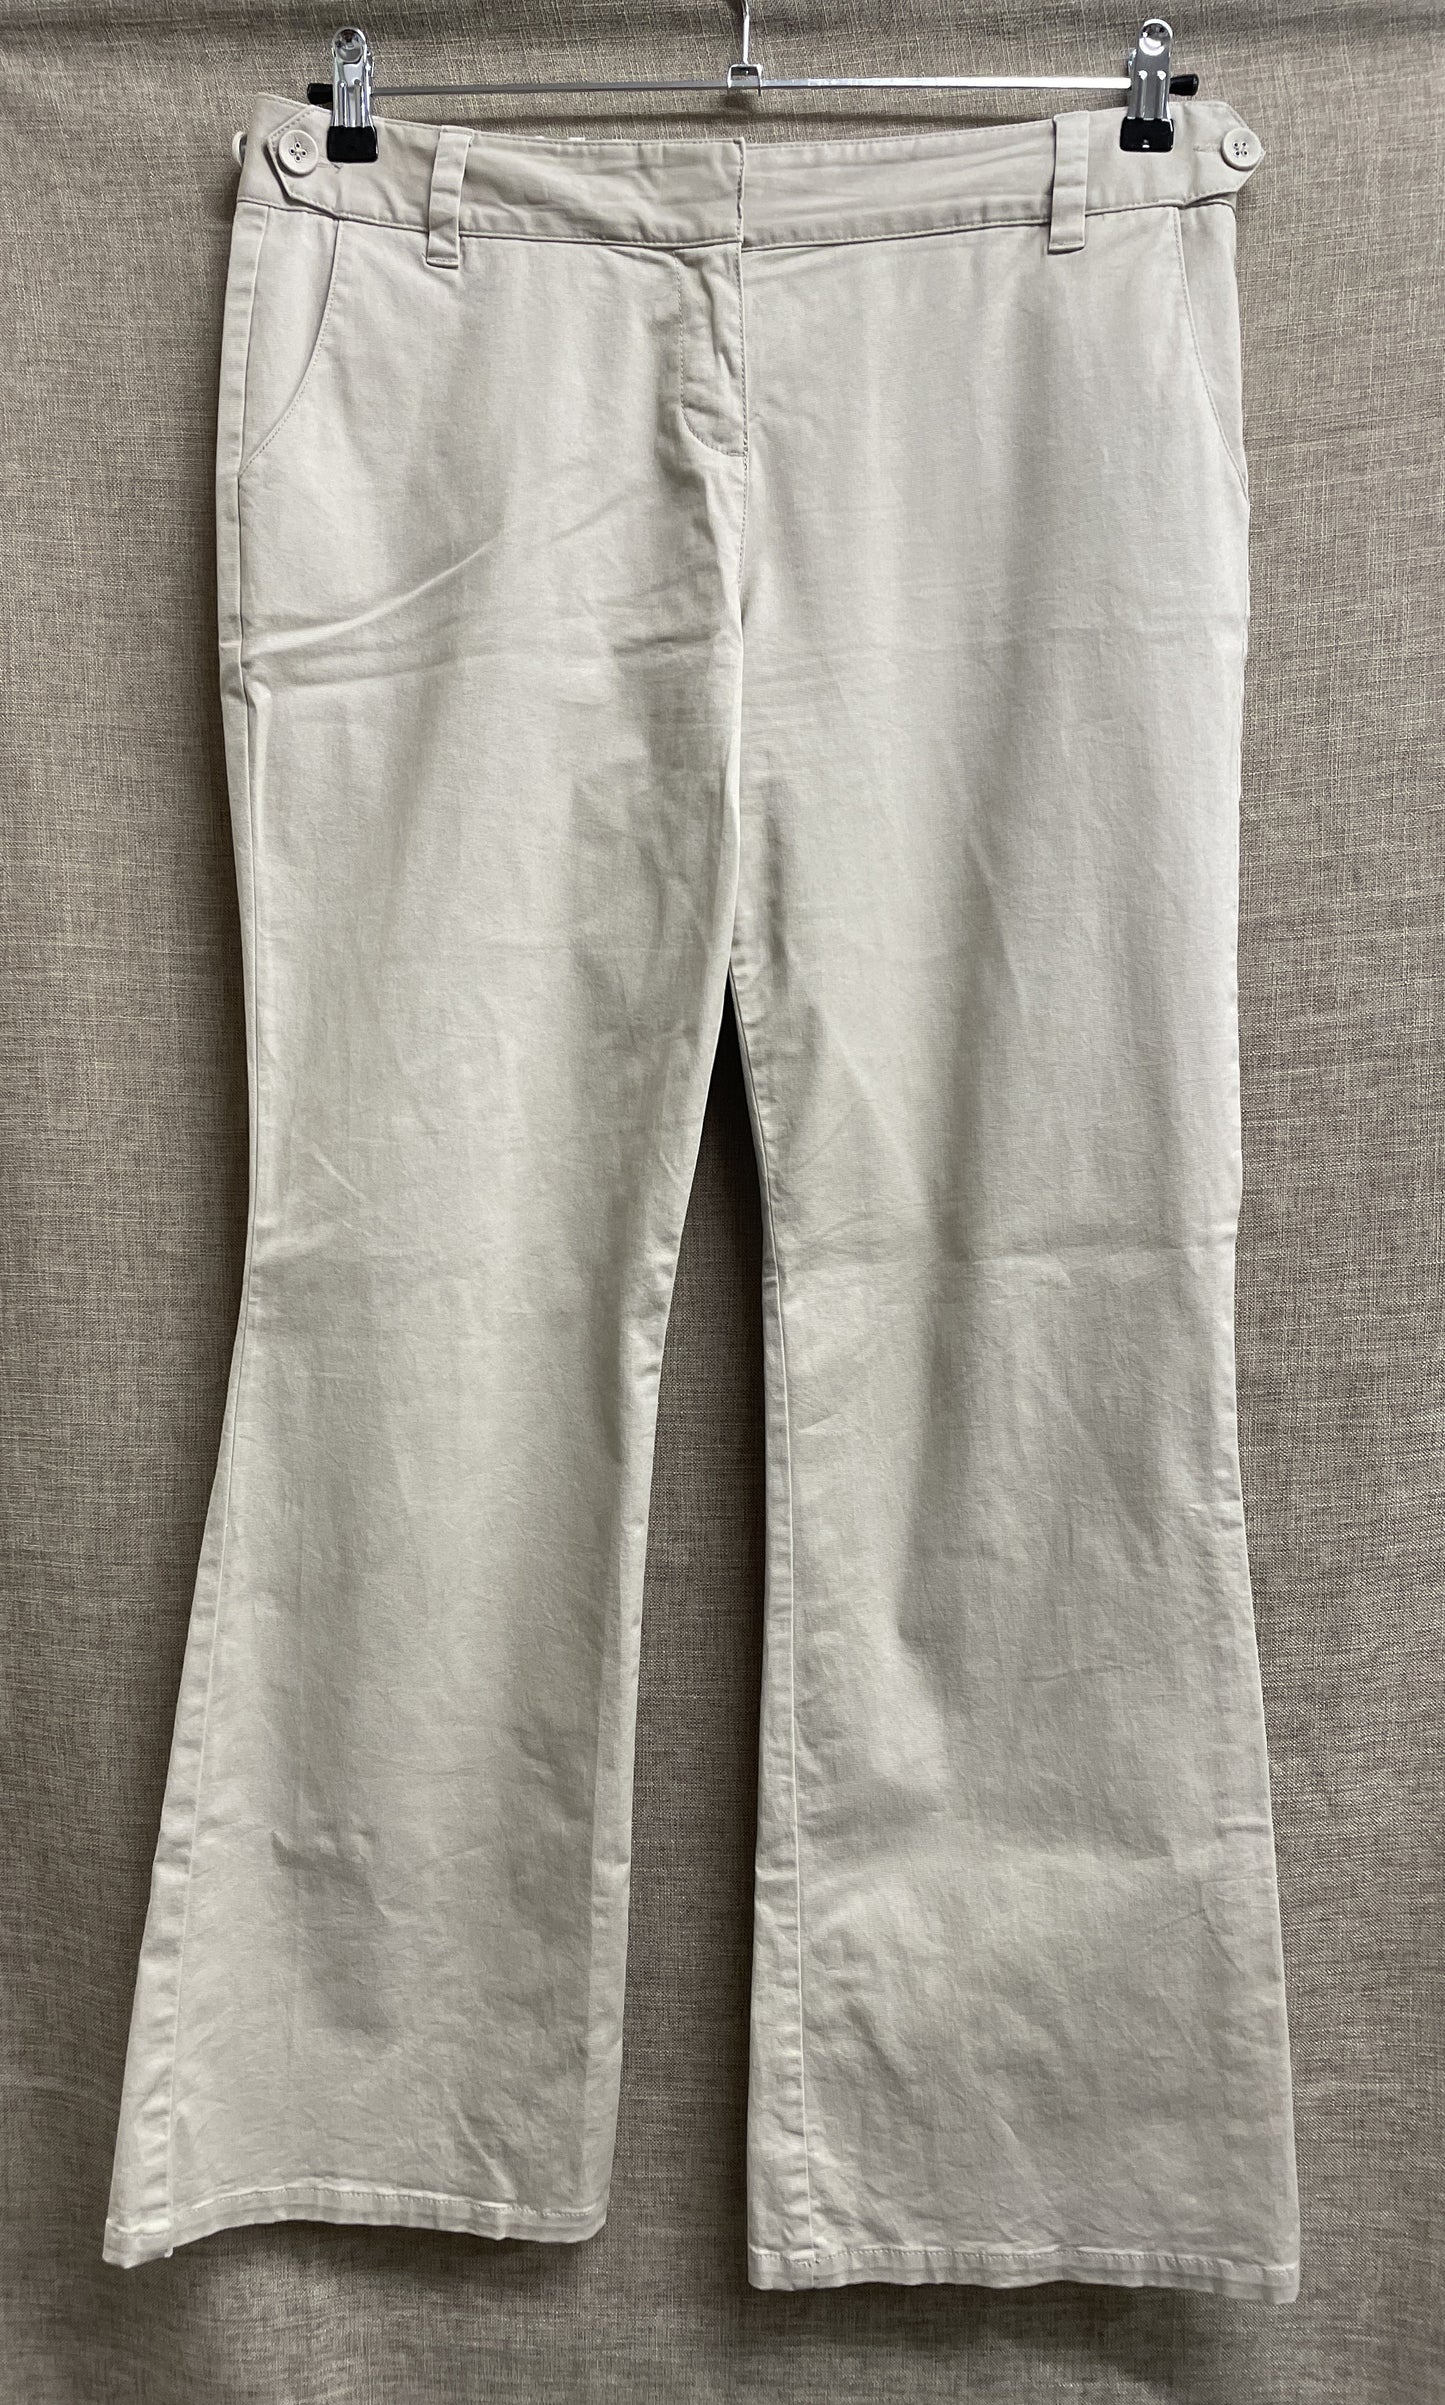 Boden Beige / Cream Bootleg Flared Casual Trousers Size 14 R